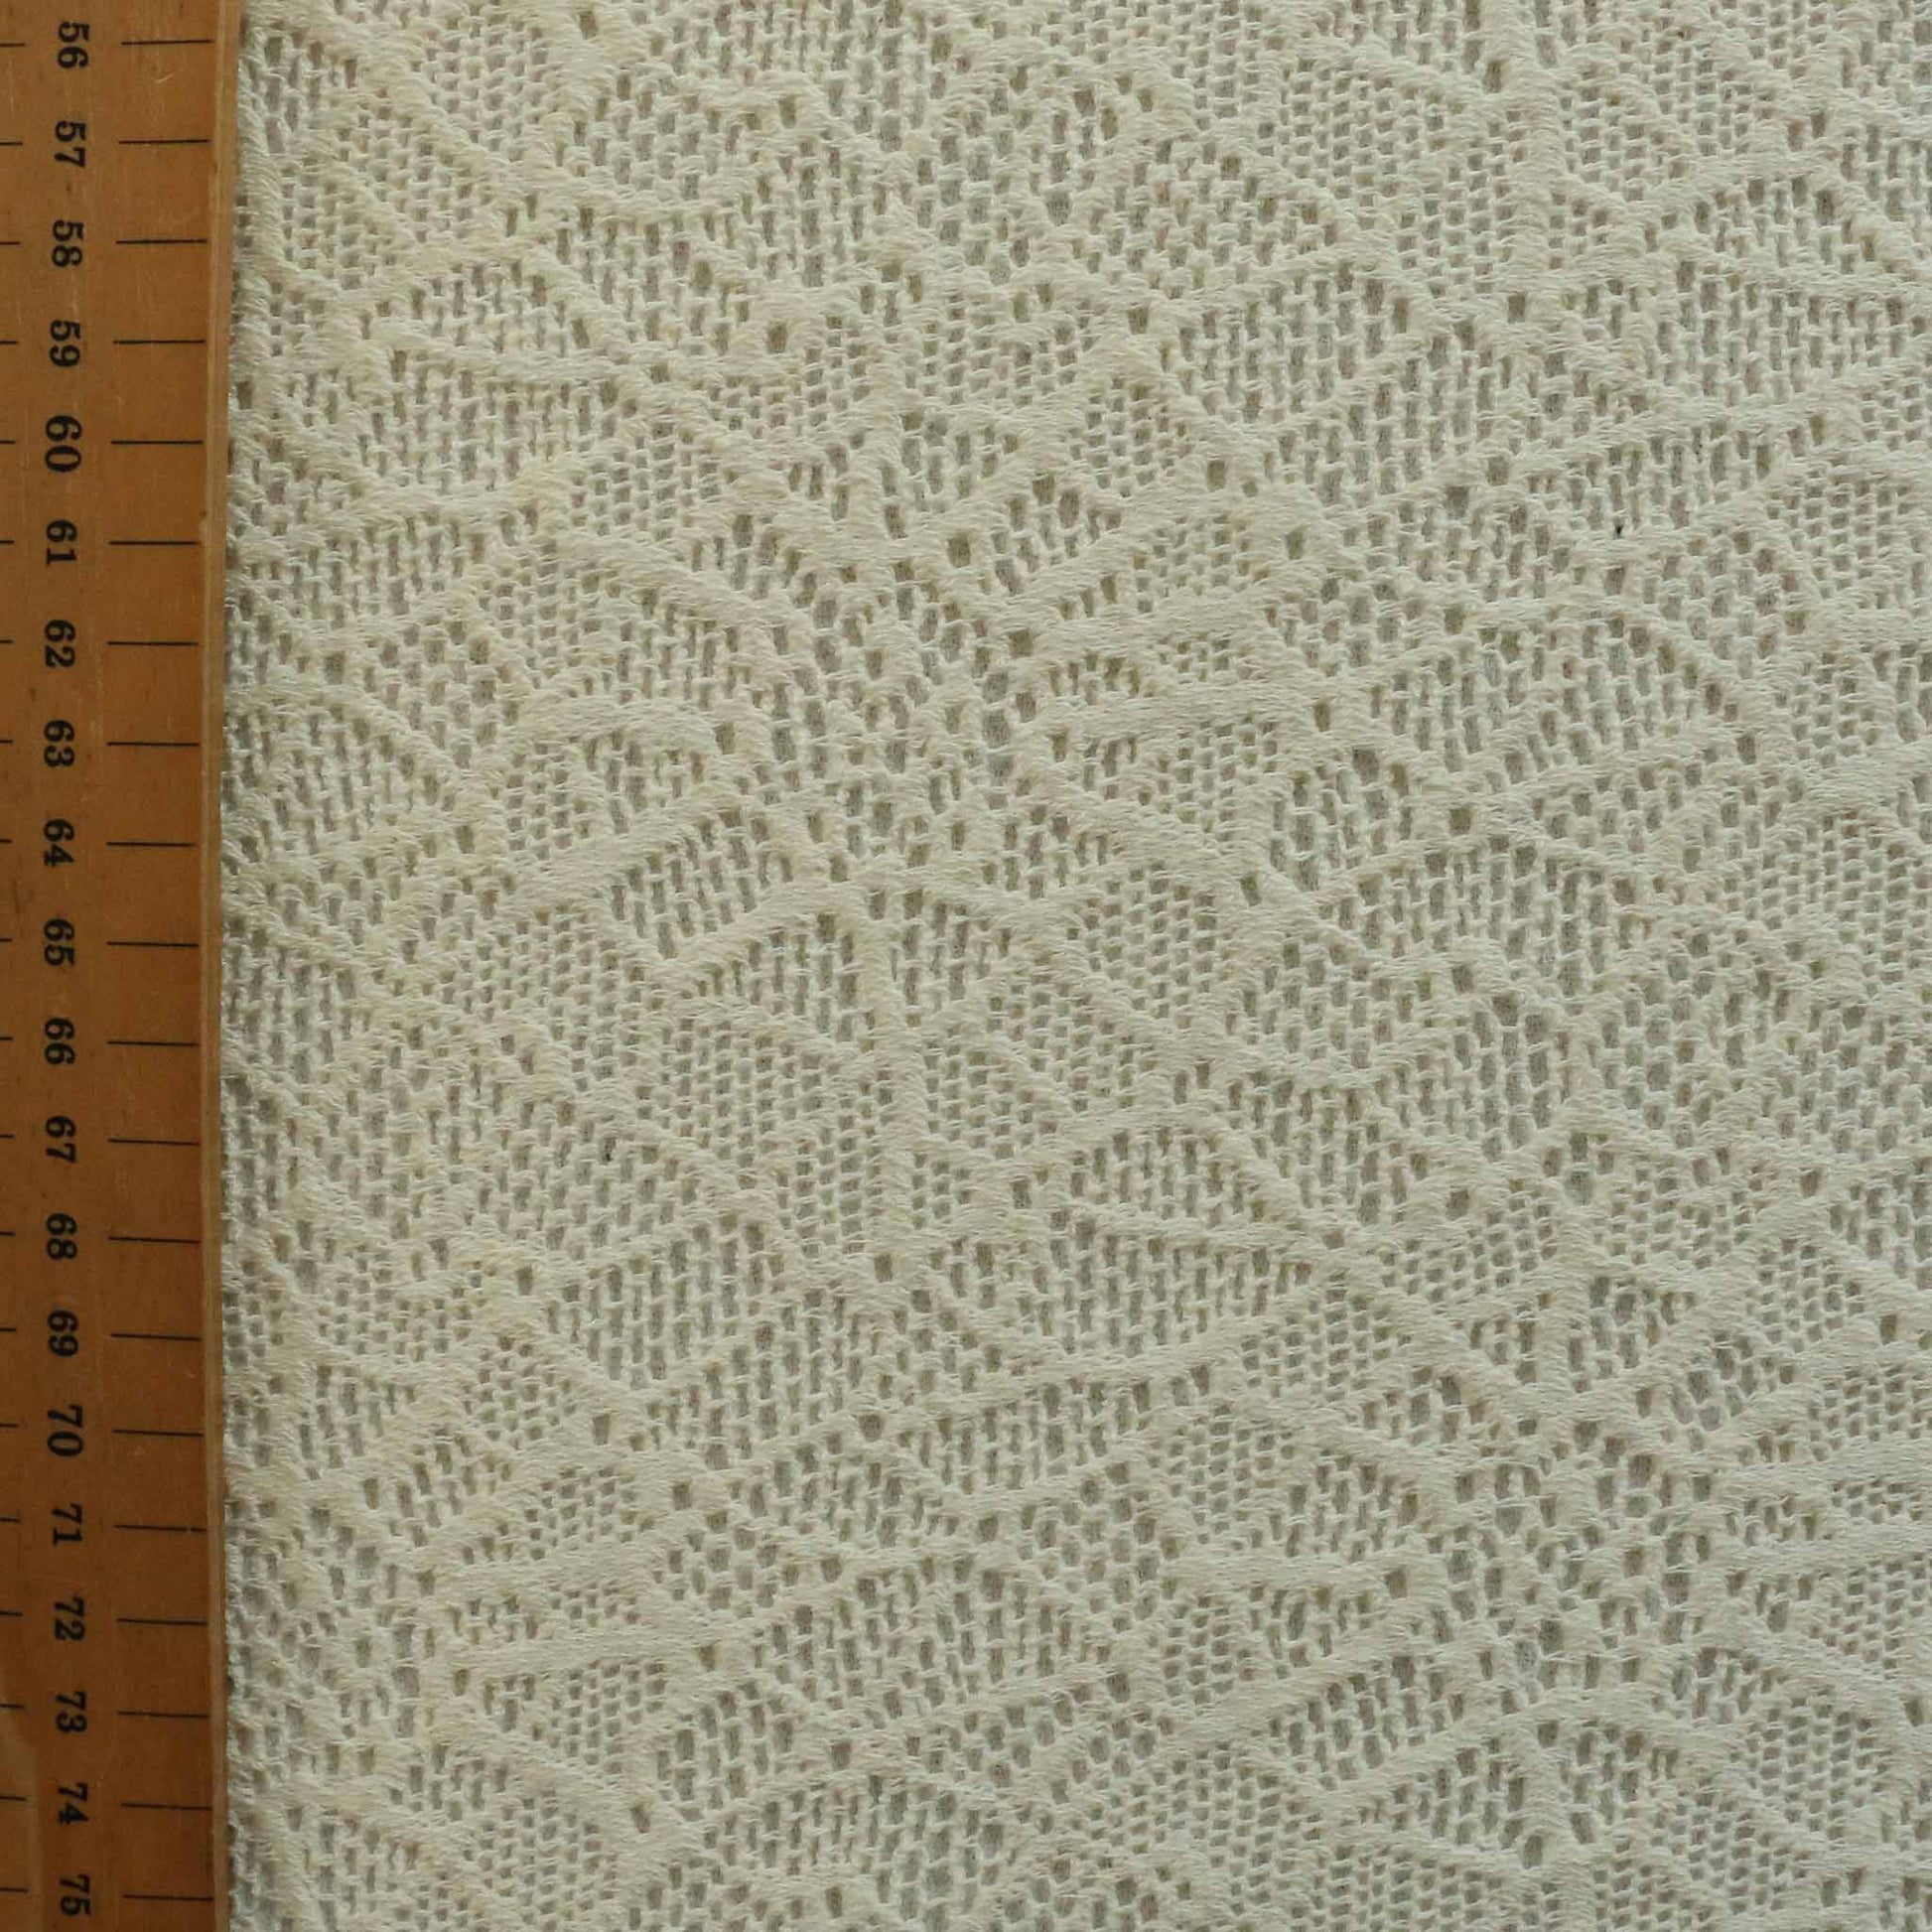 vintage cream lace embroidery dressmaking fabric